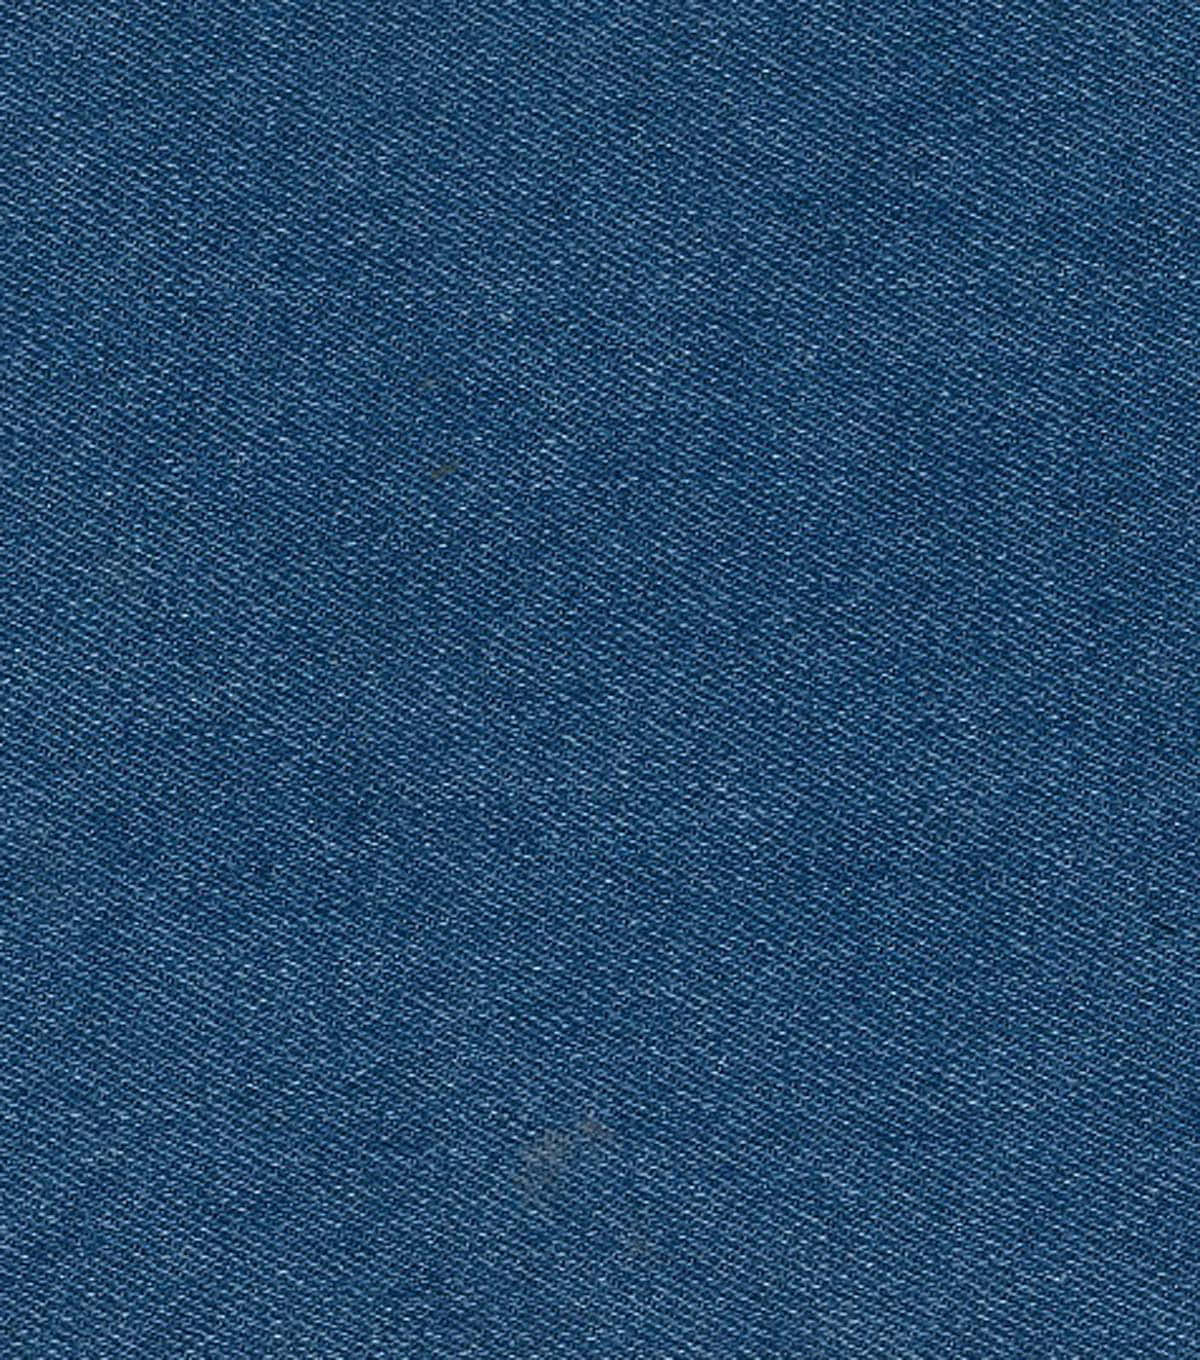 Download A stylish jean in the color of the sea Wallpaper | Wallpapers.com